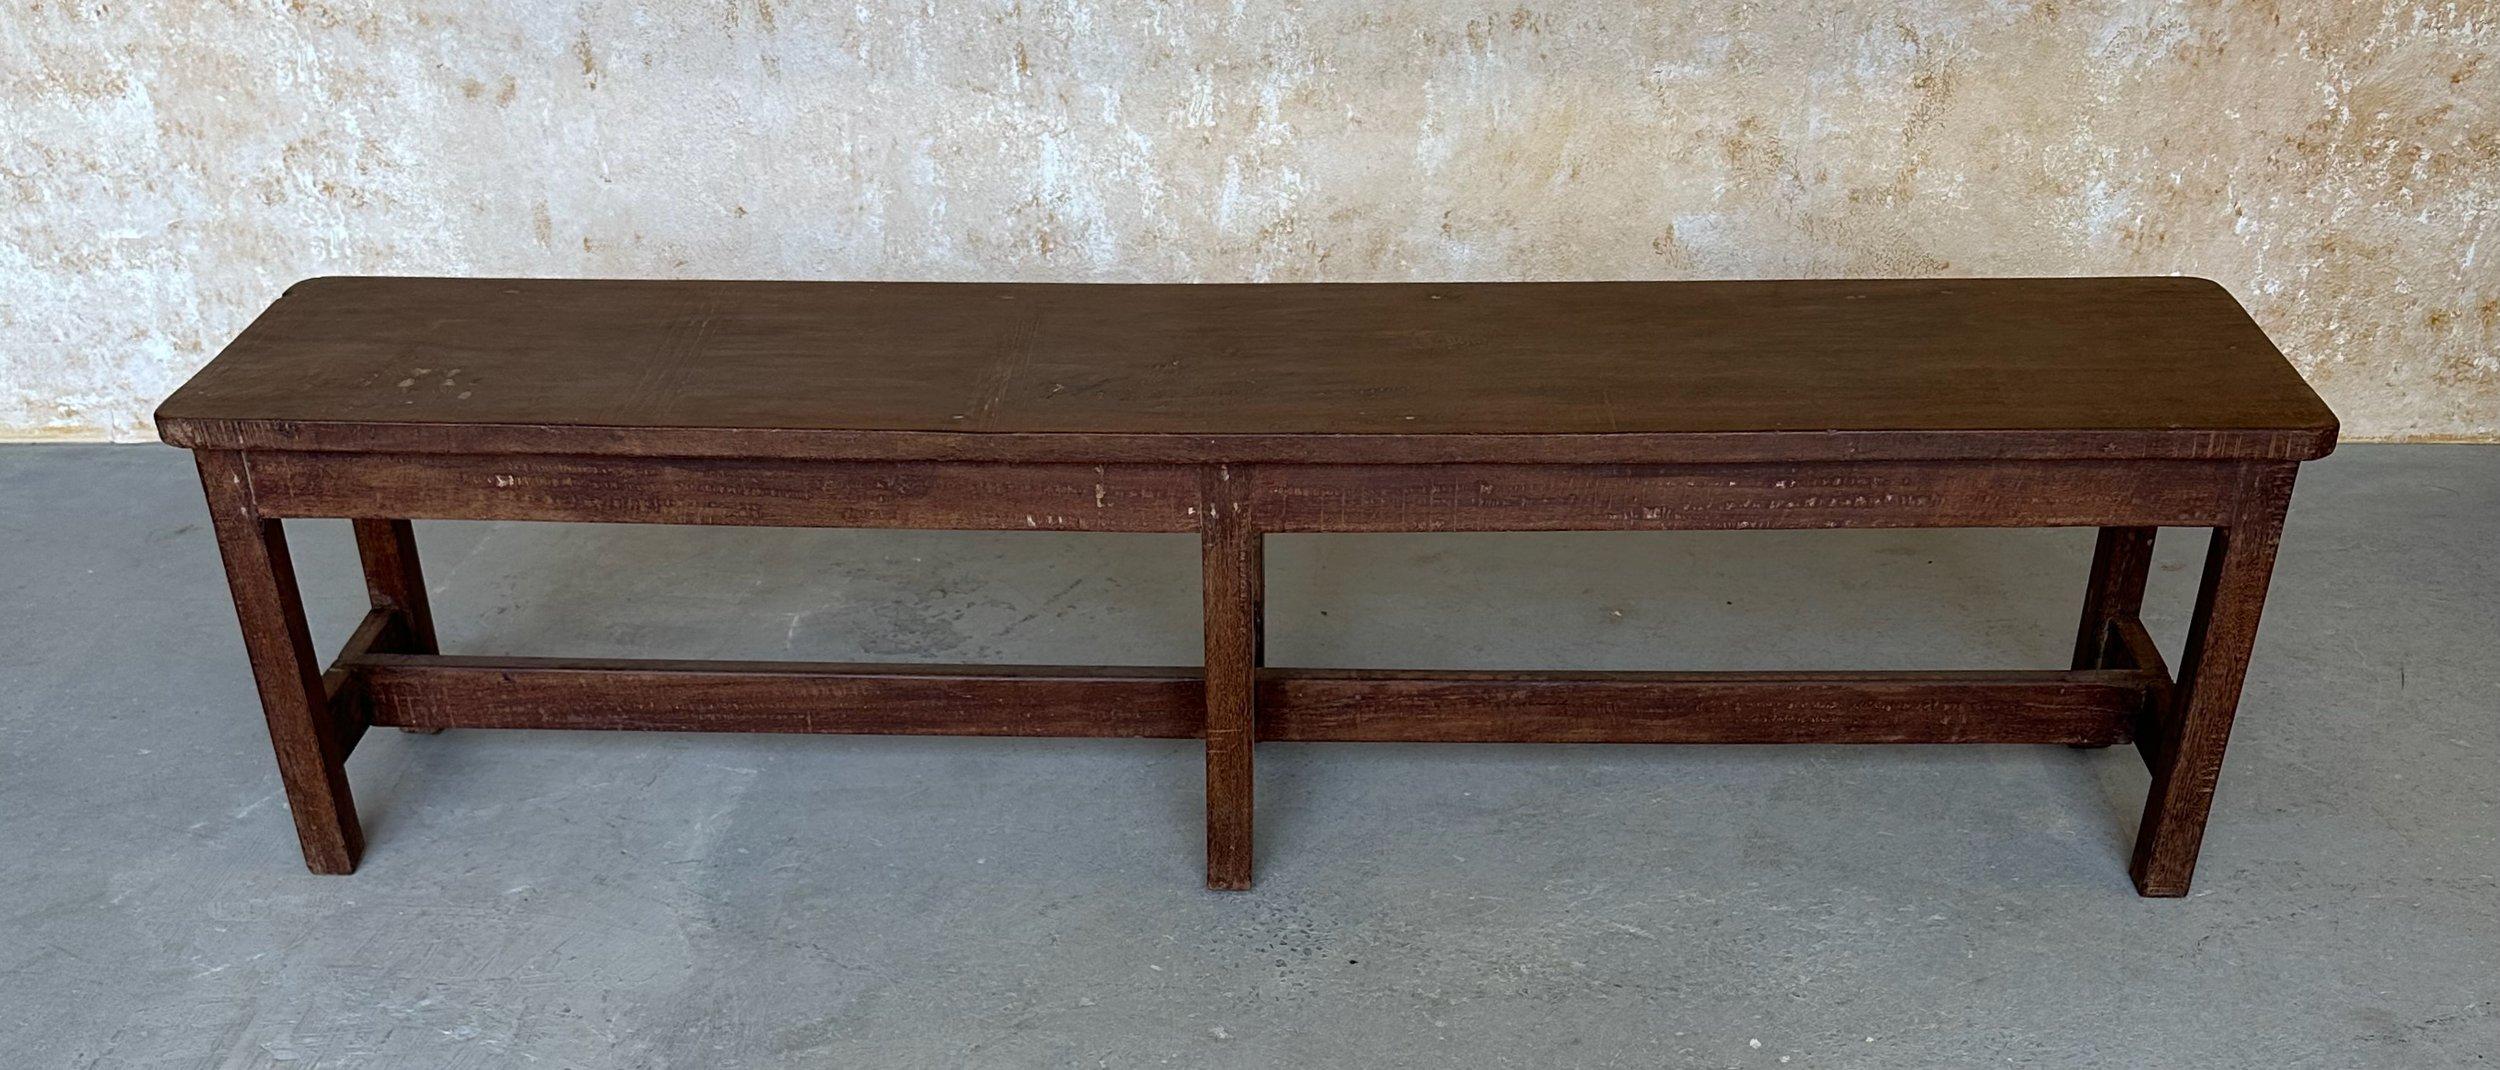 Pair of Large Teak Benches For Sale 4